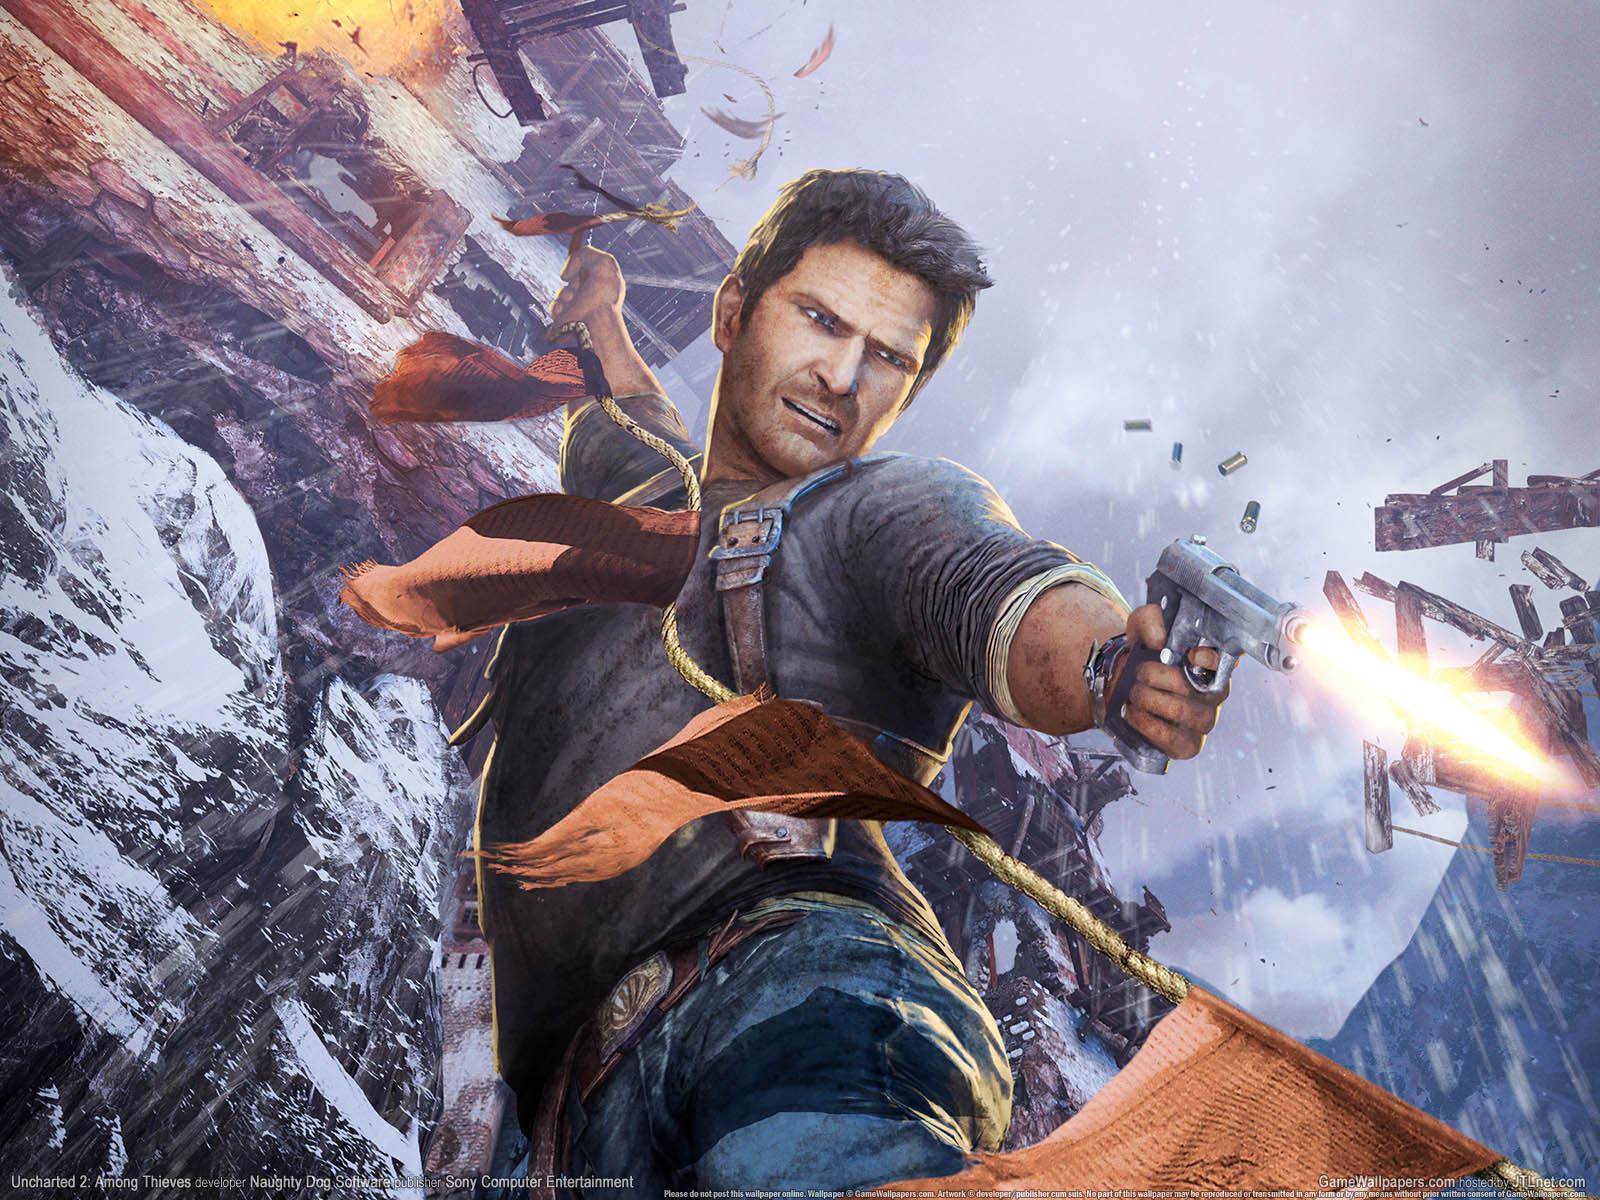 Uncharted 2%3A Among Thieves wallpaper 04 1600x1200